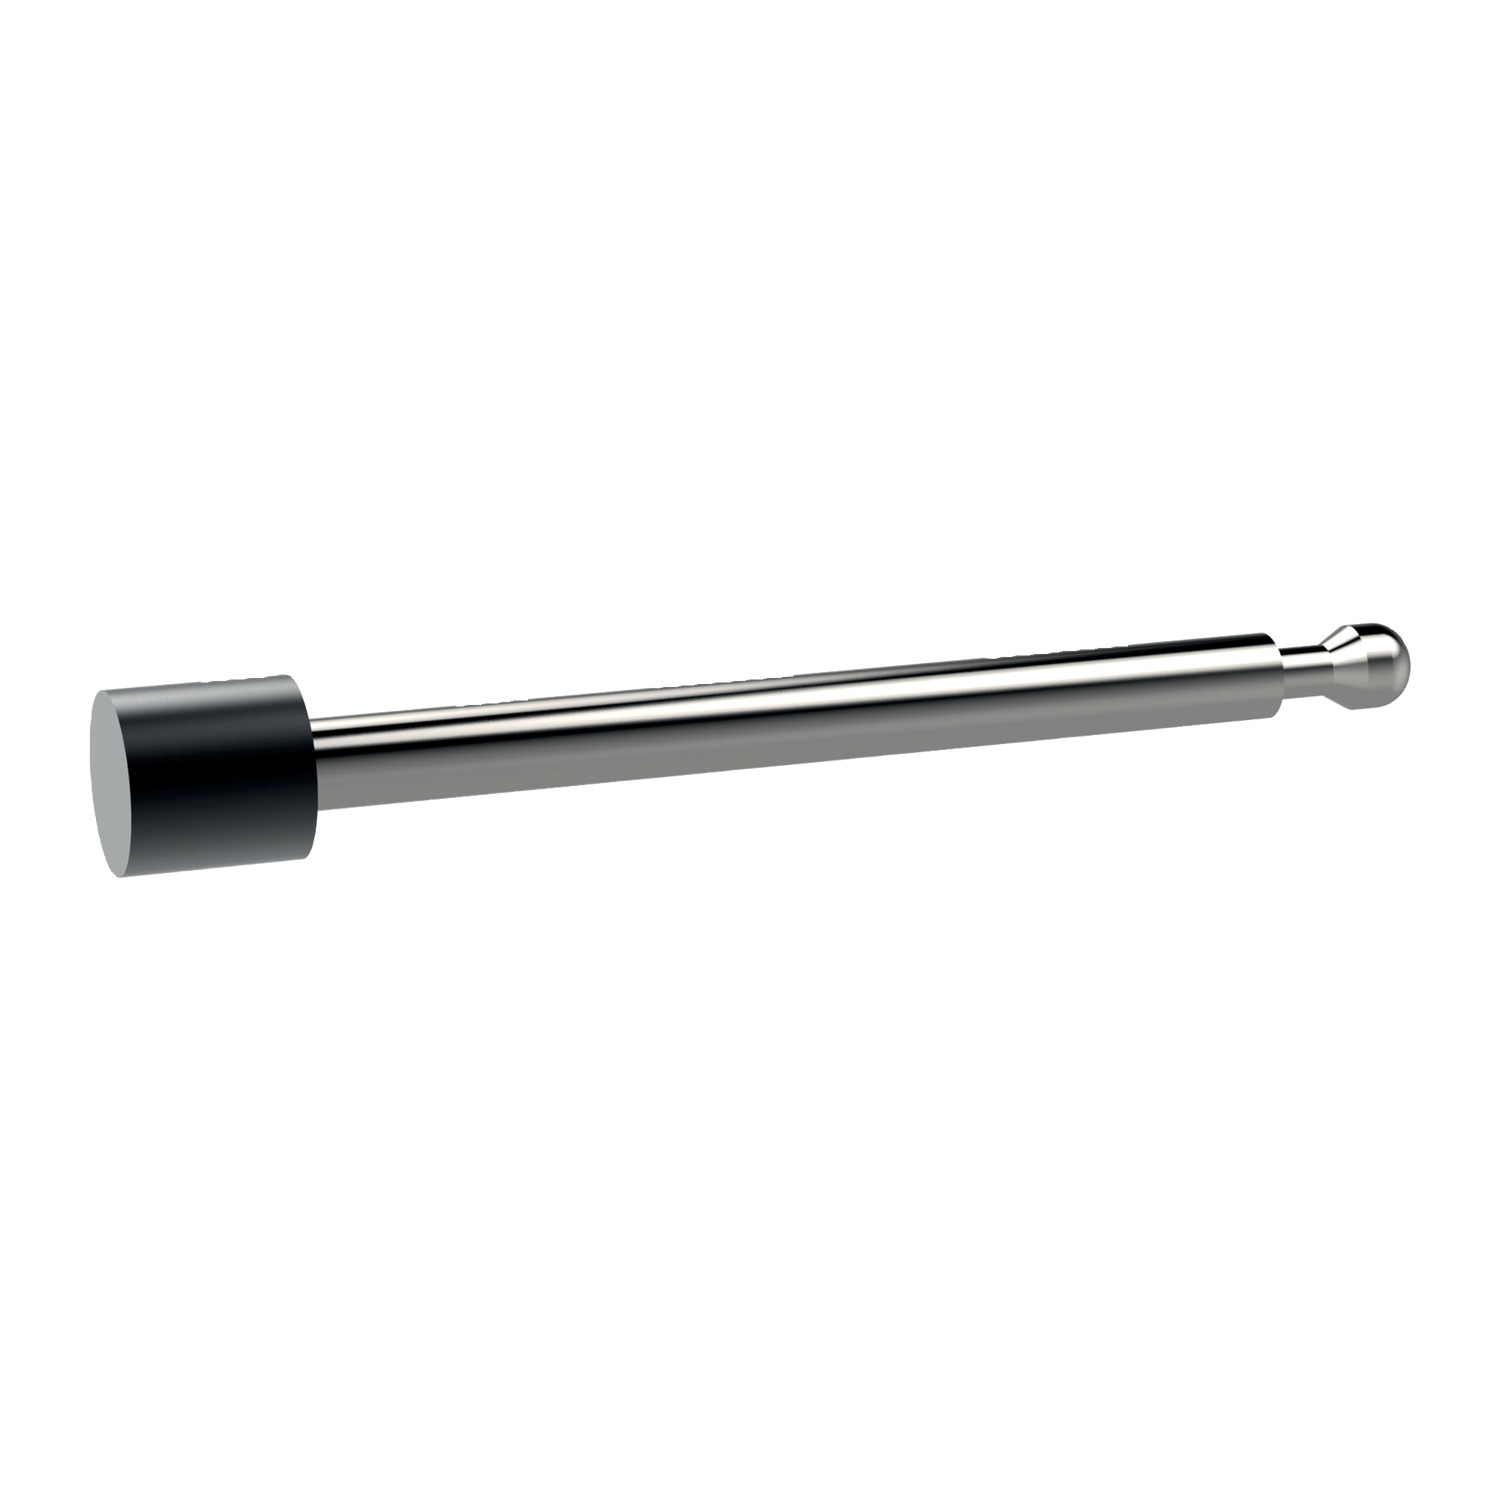 Product 12620.3, Clamping Pins for pull clamps / 